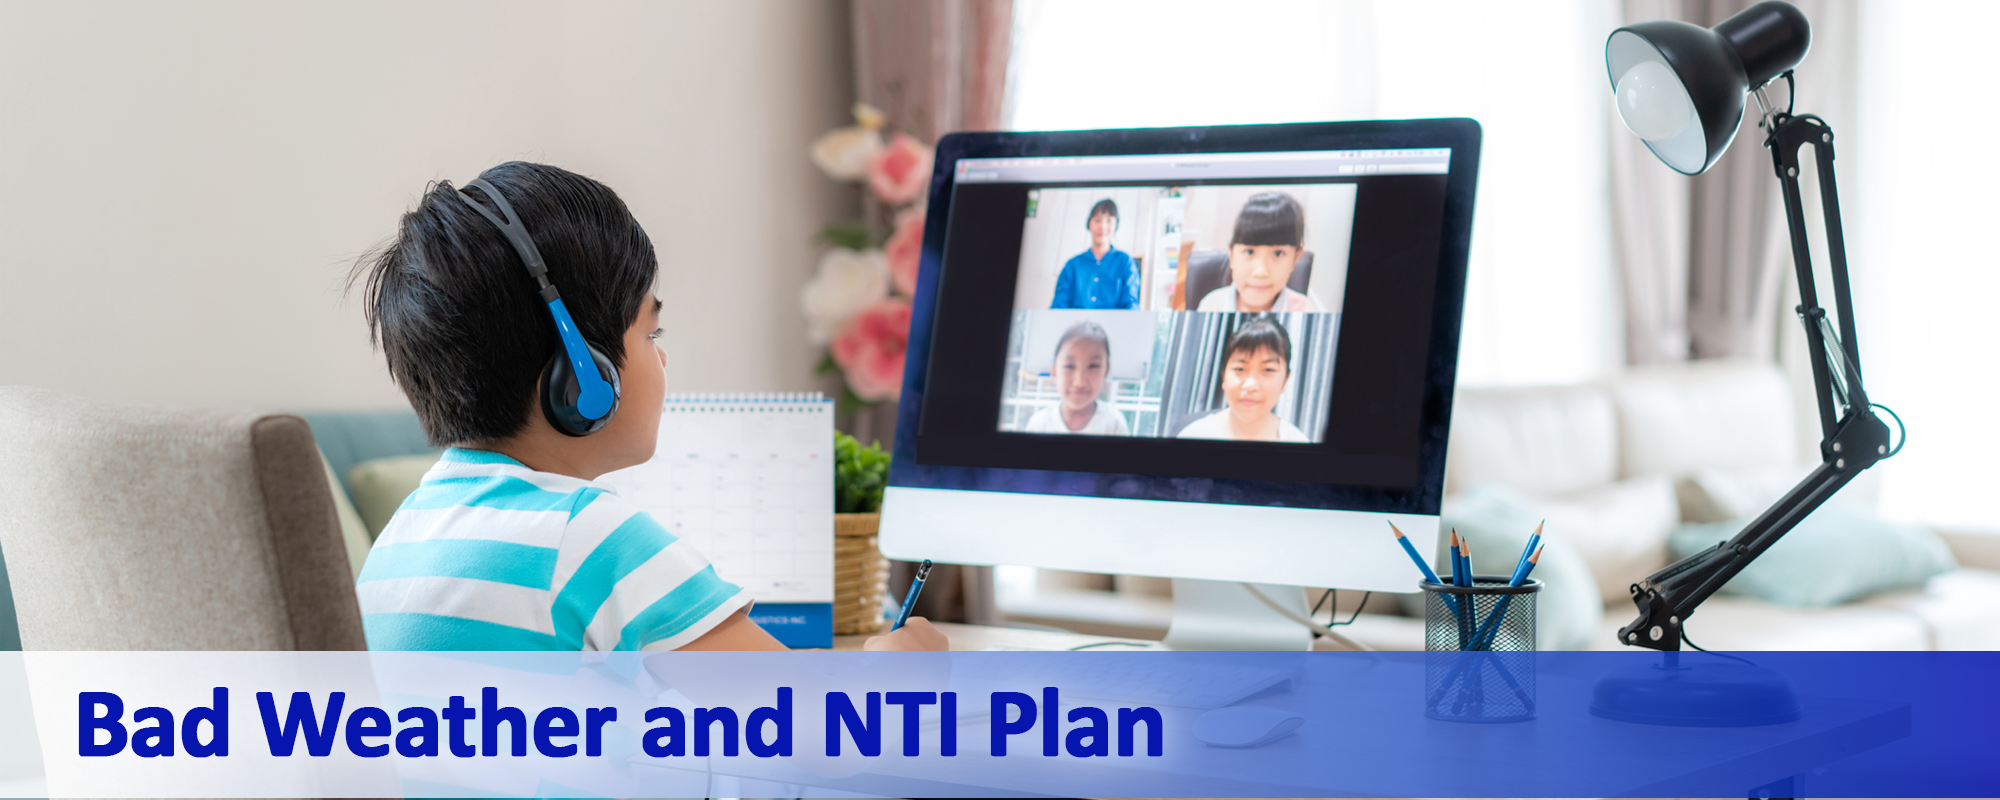 Bad Weather and NTI Plan - picture with a student on a computer learning